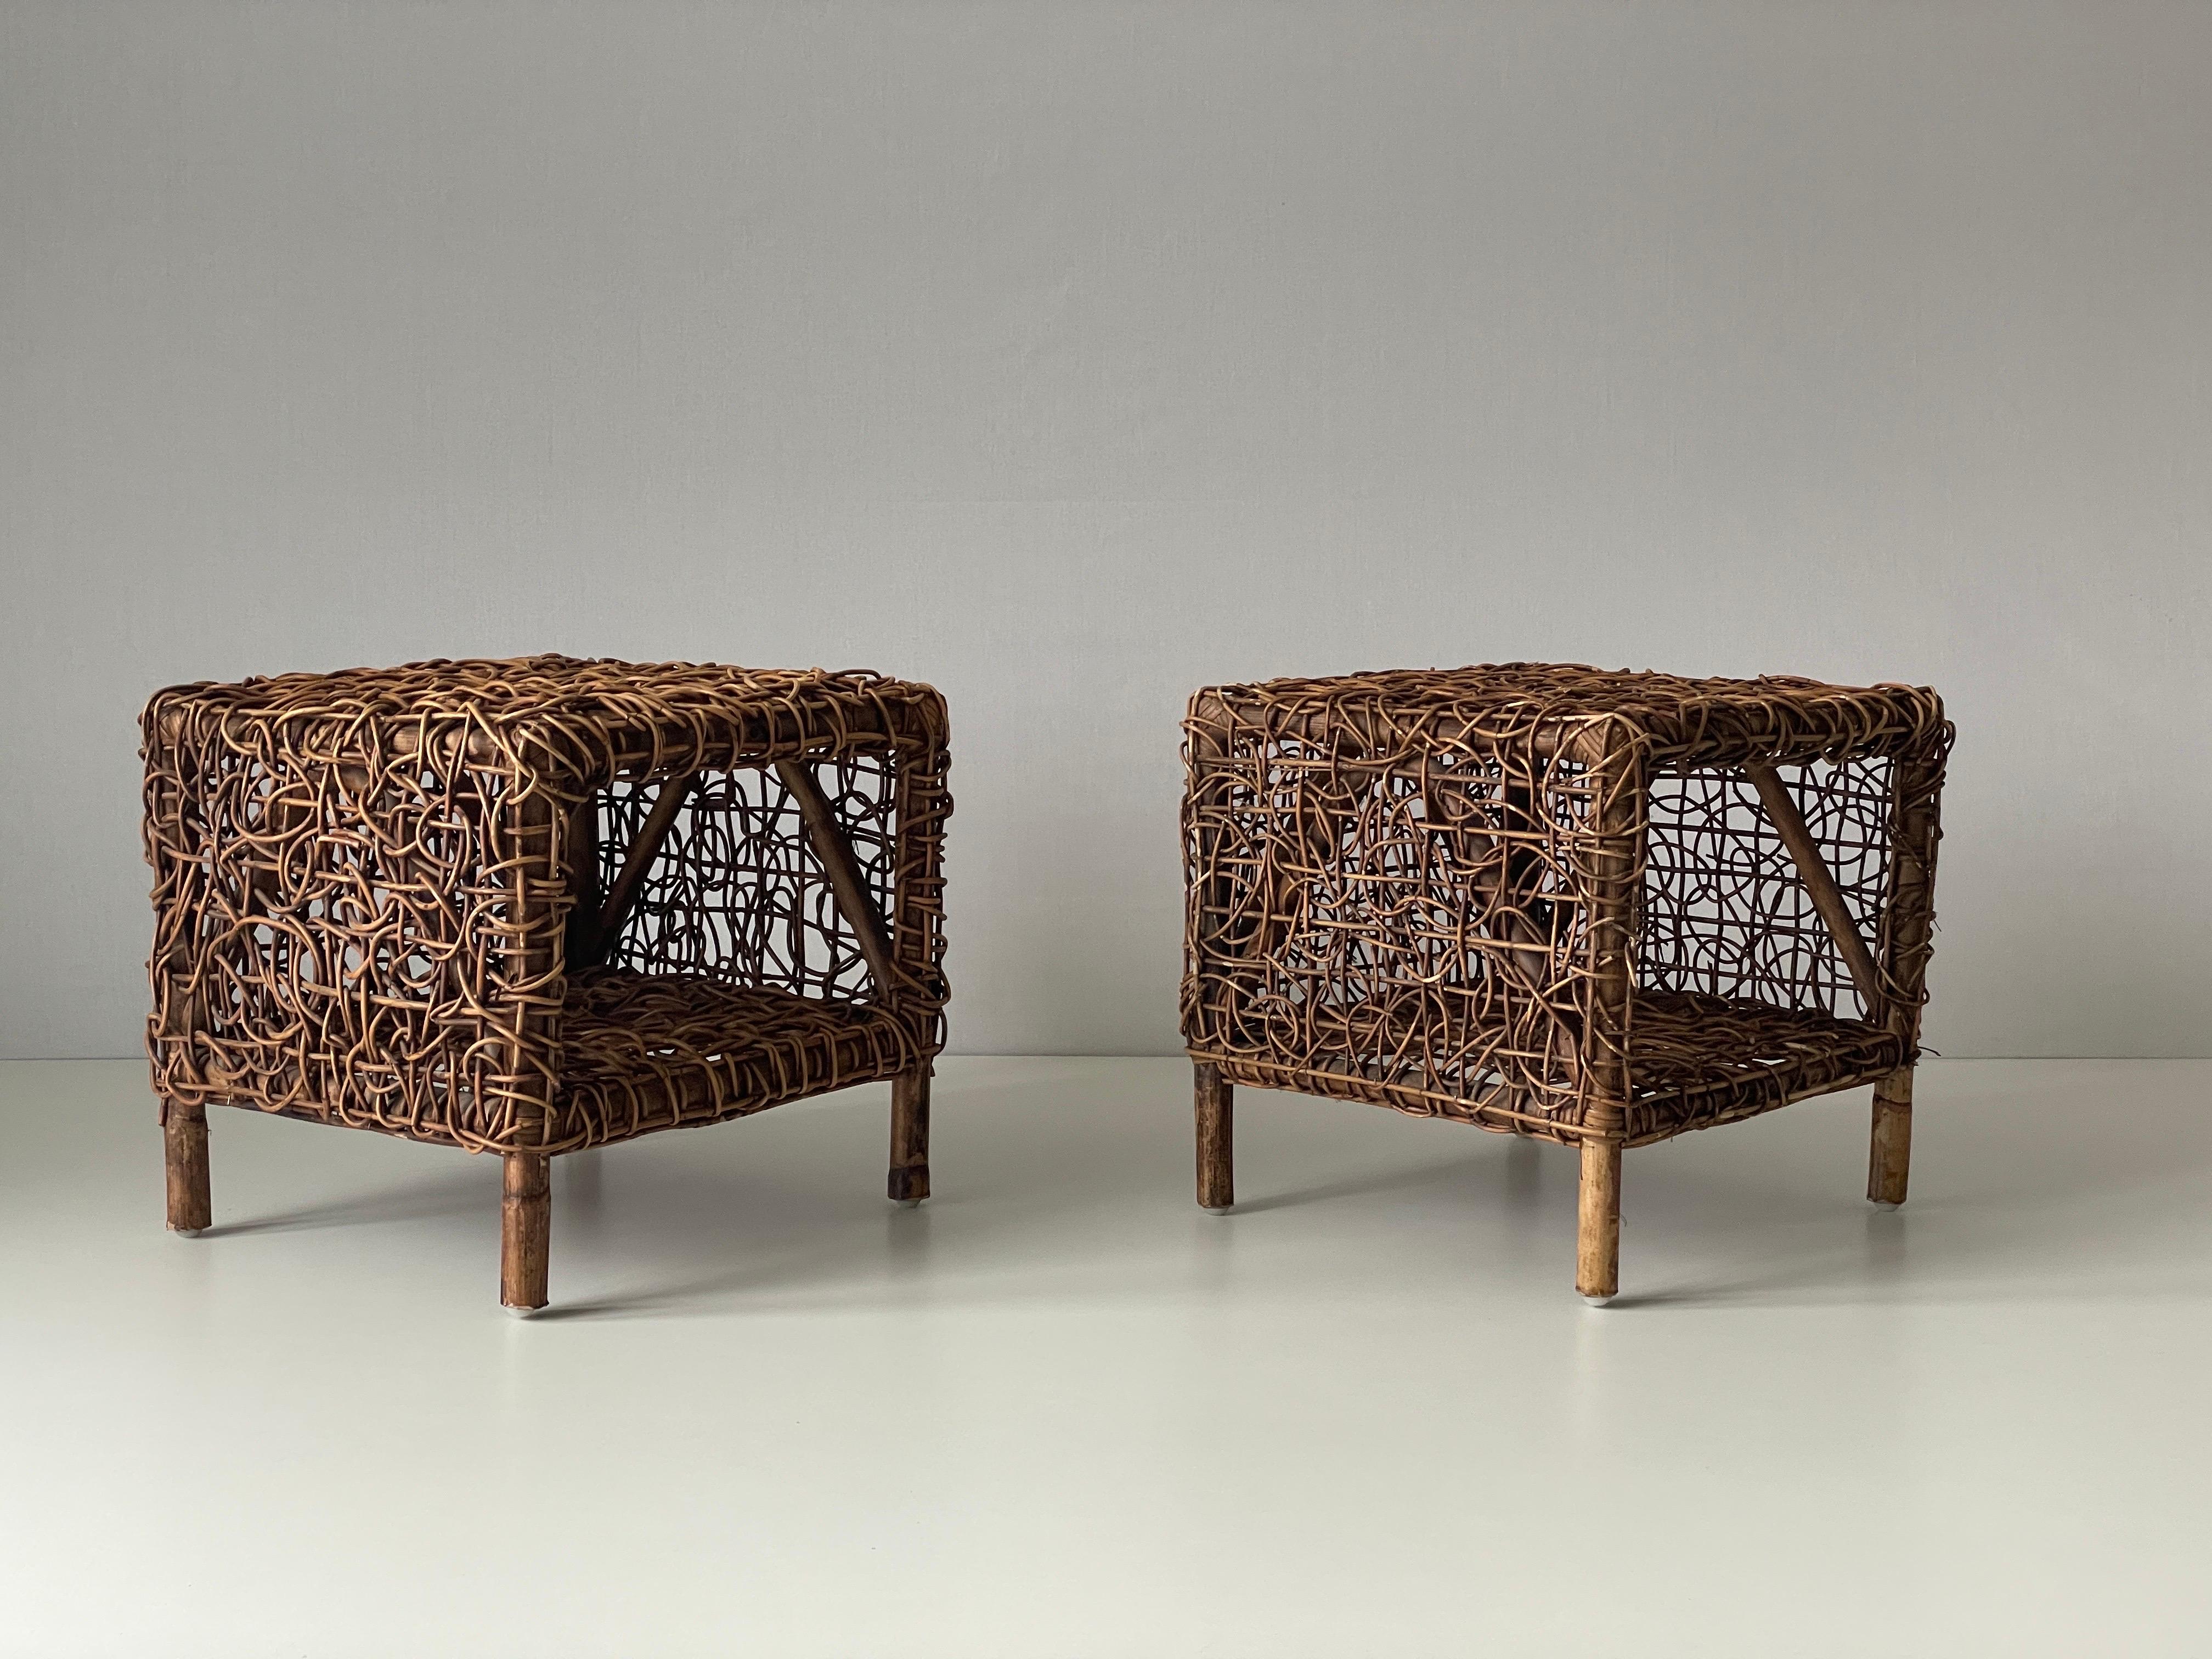 Unusual Design Woven Bamboo Pair of Bedside Tables, 1960s, Italy In Excellent Condition For Sale In Hagenbach, DE